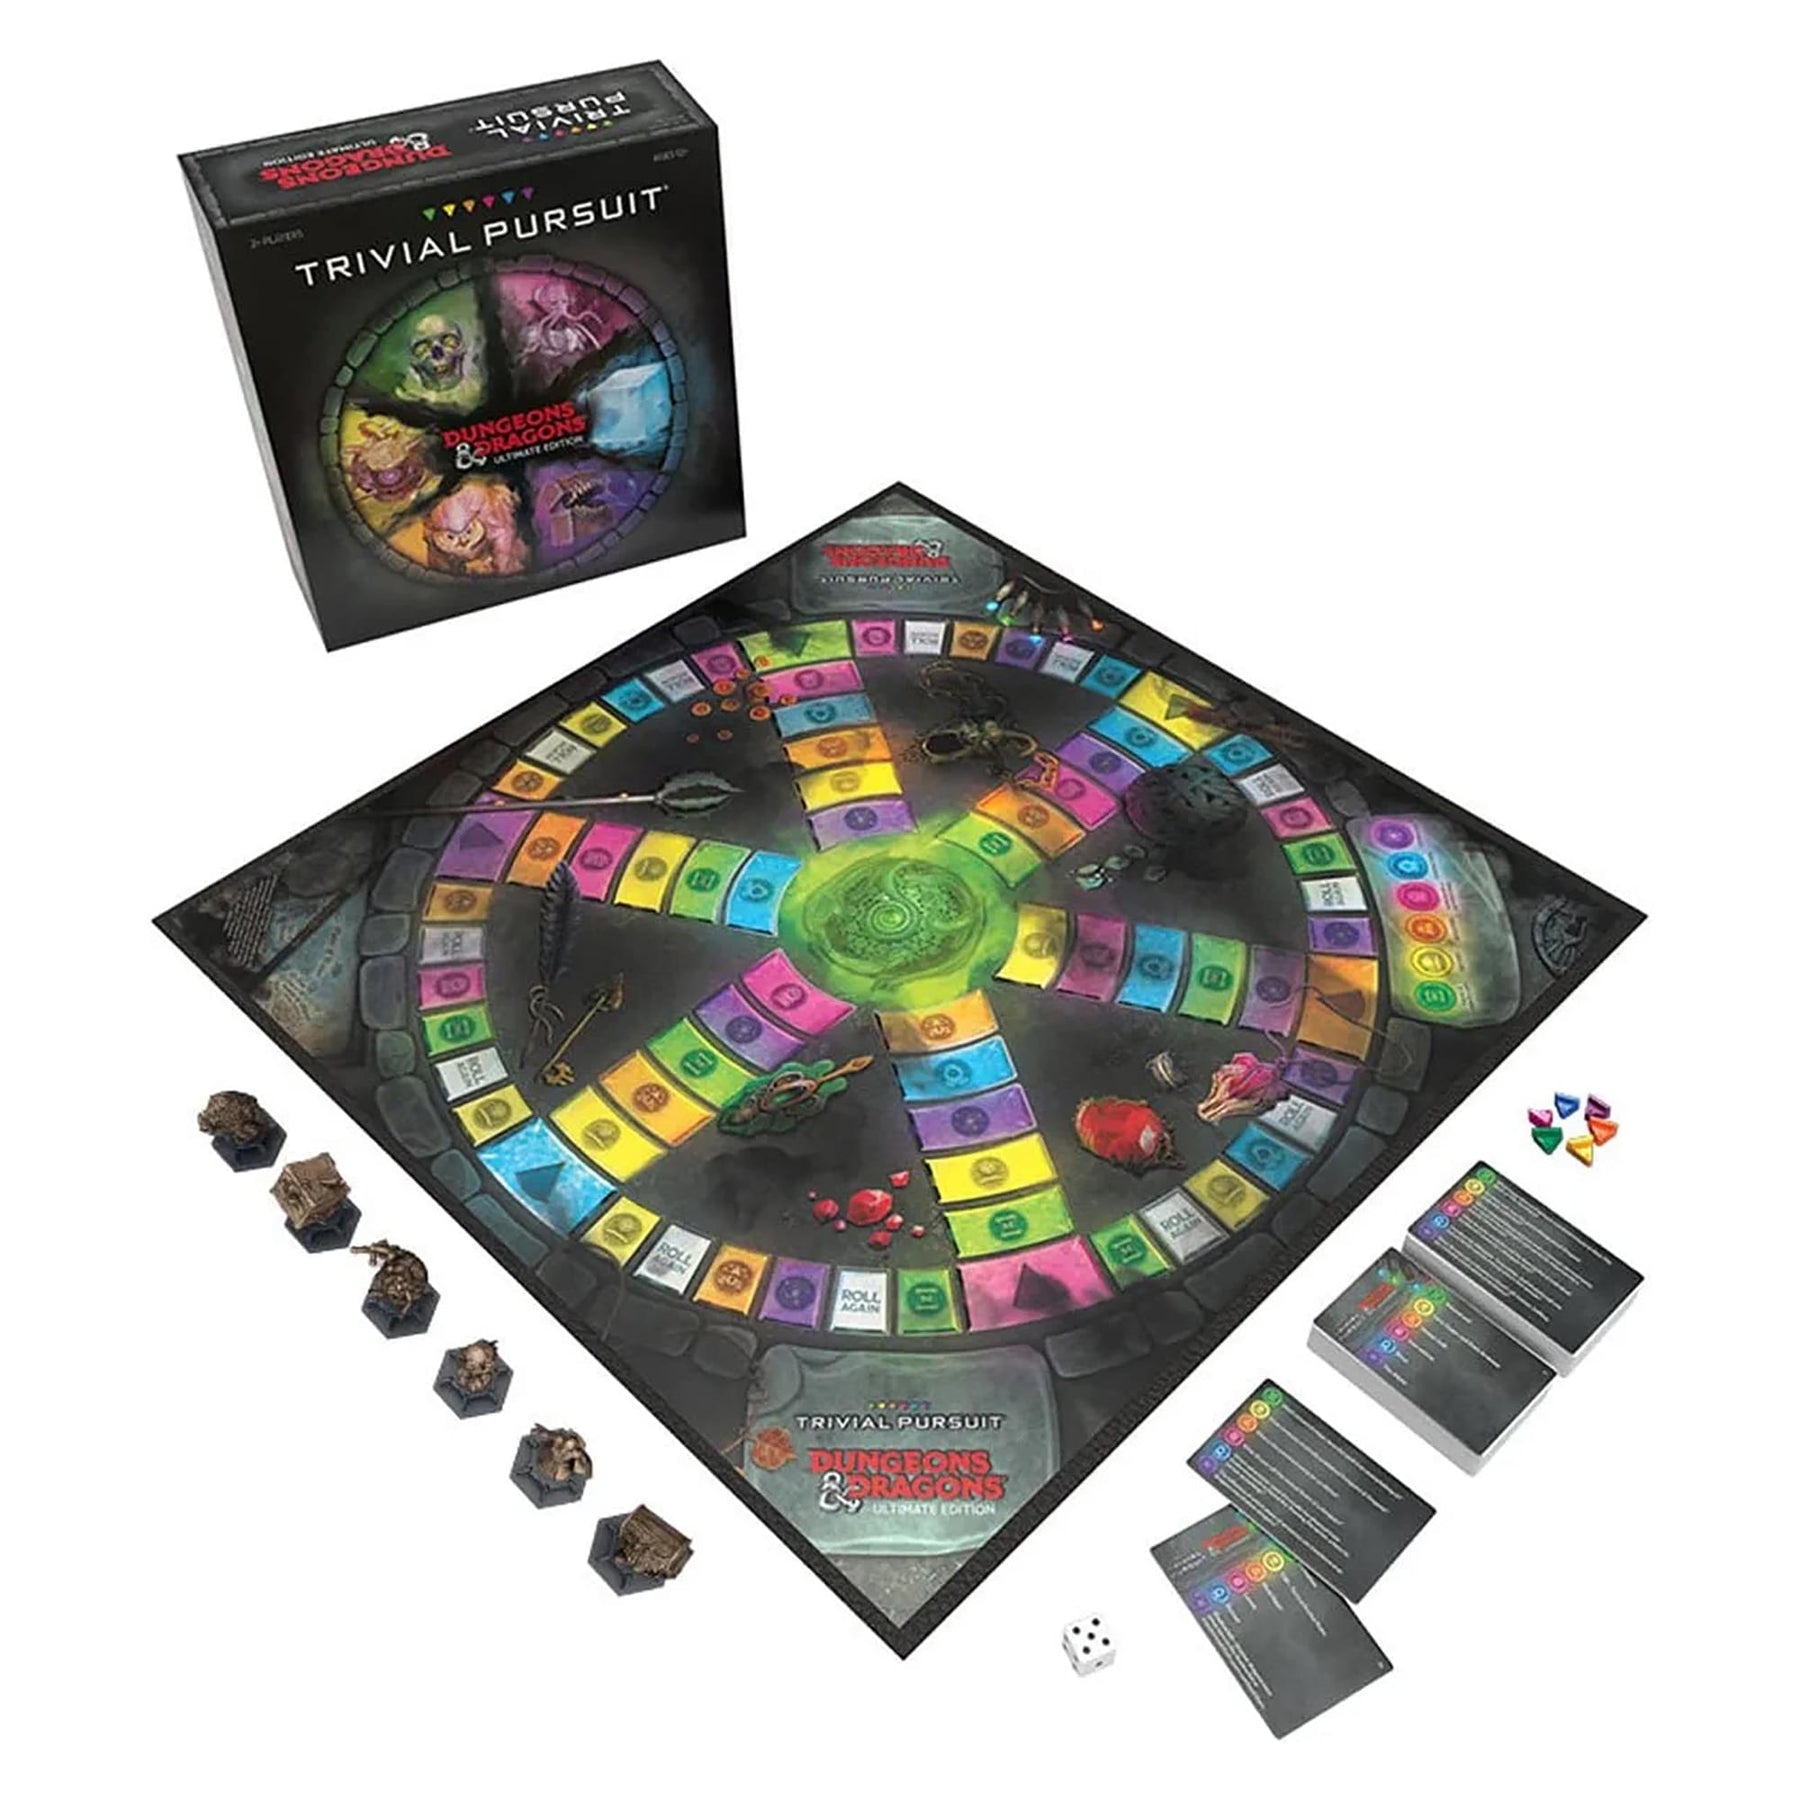 Dungeons & Dragons Ultimate Trivial Pursuit Board Game